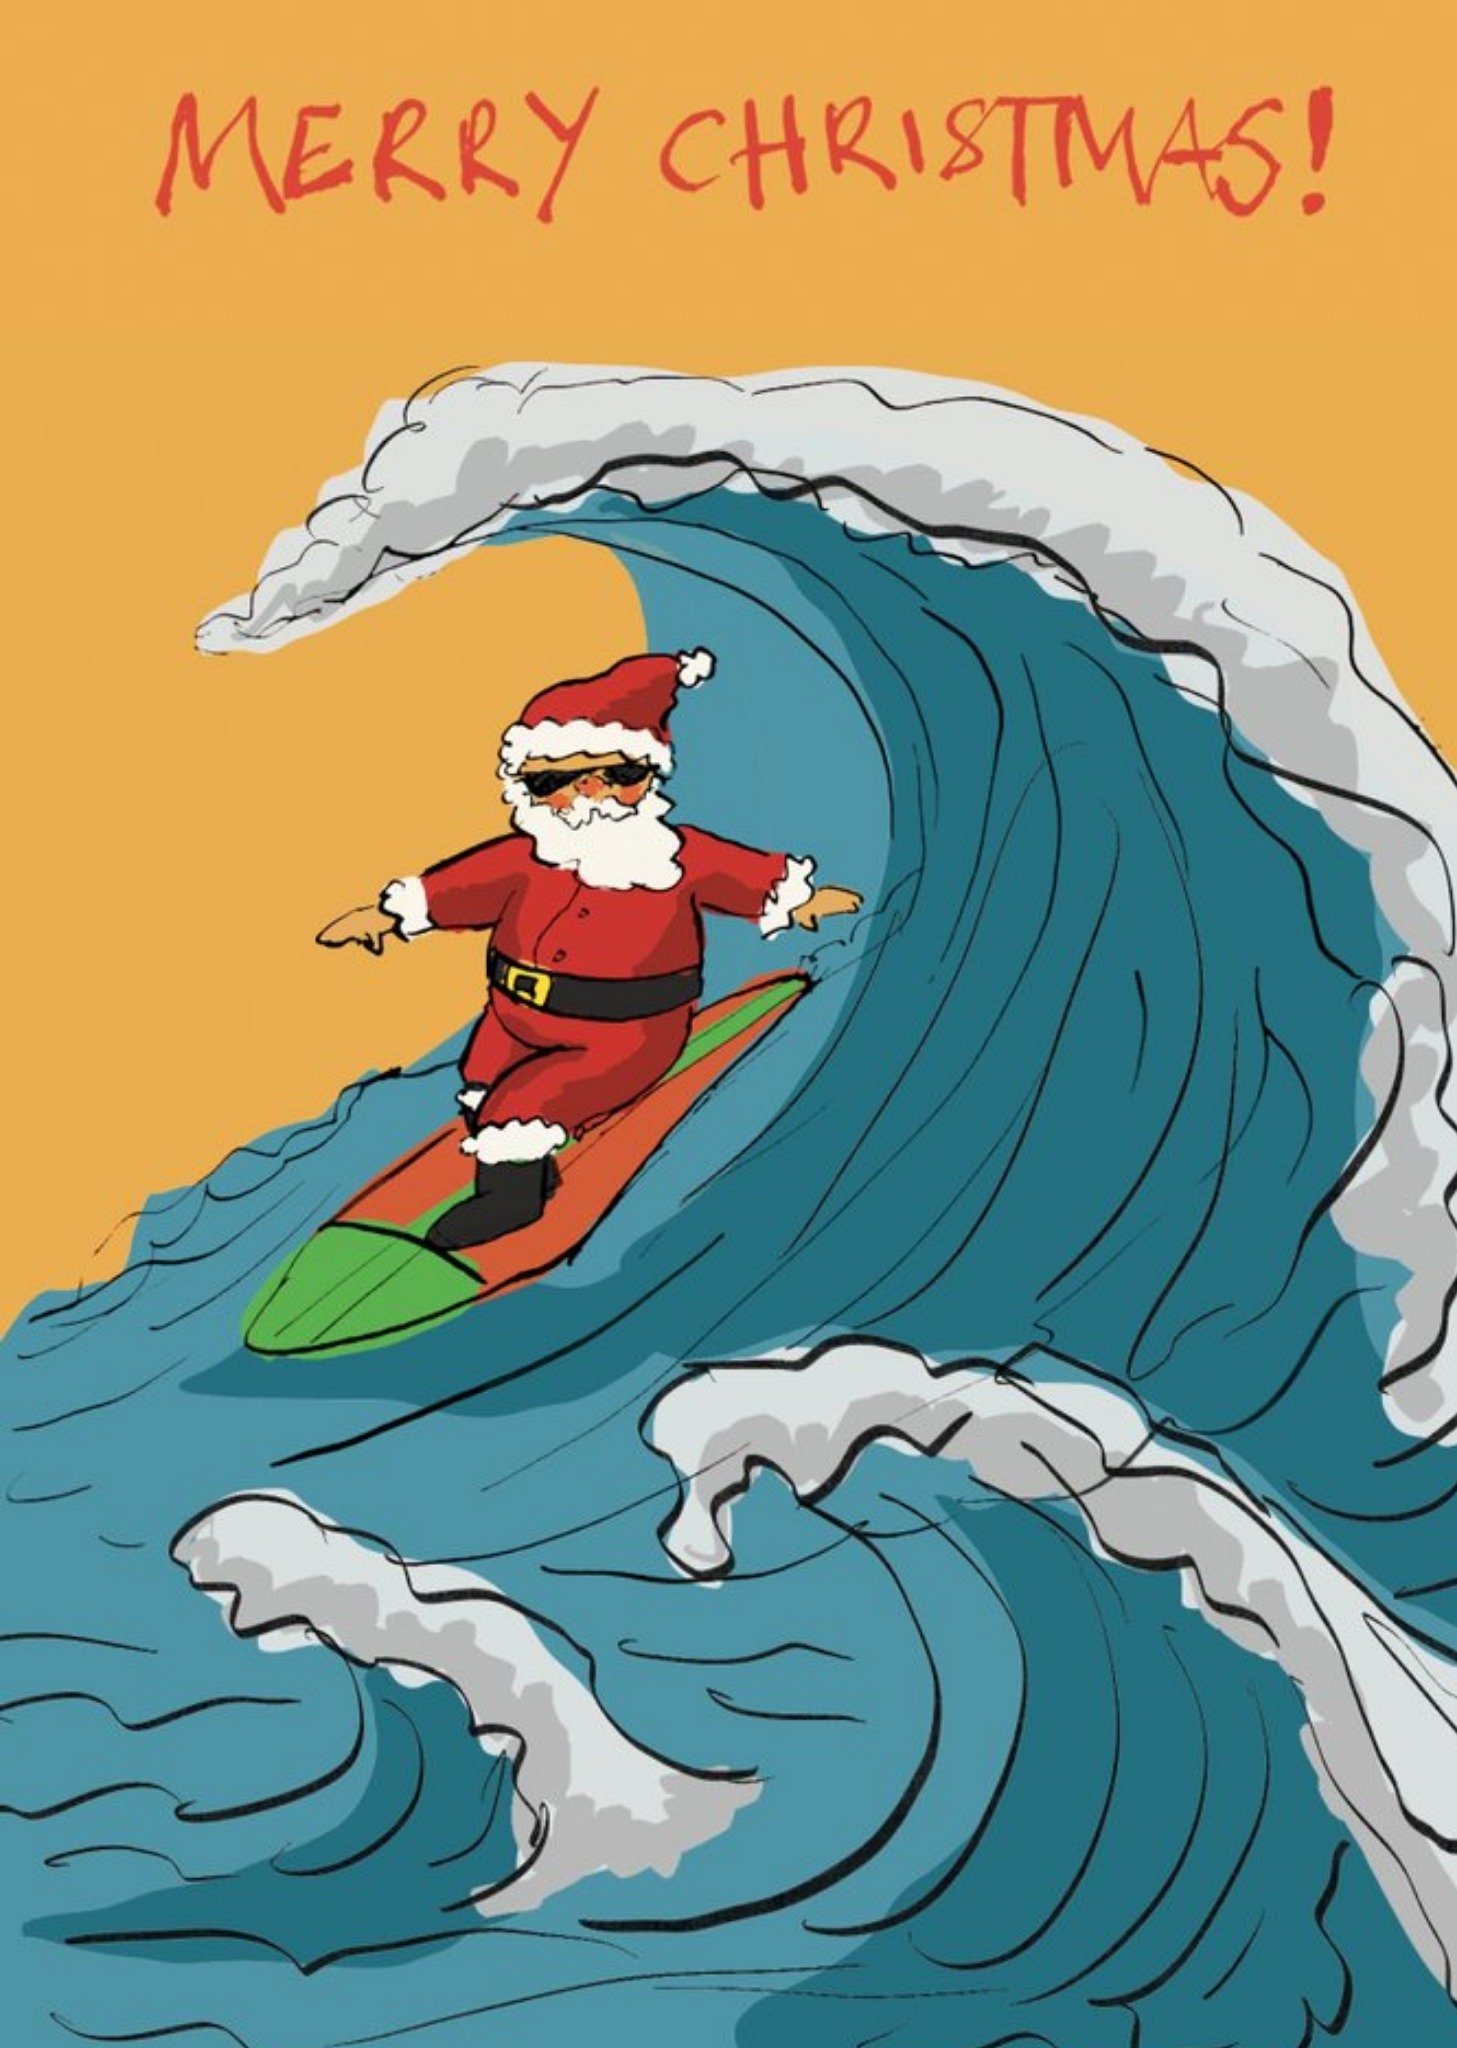 Friends Poet And Painter Surfing Illustration Australia Christmas Card, Large